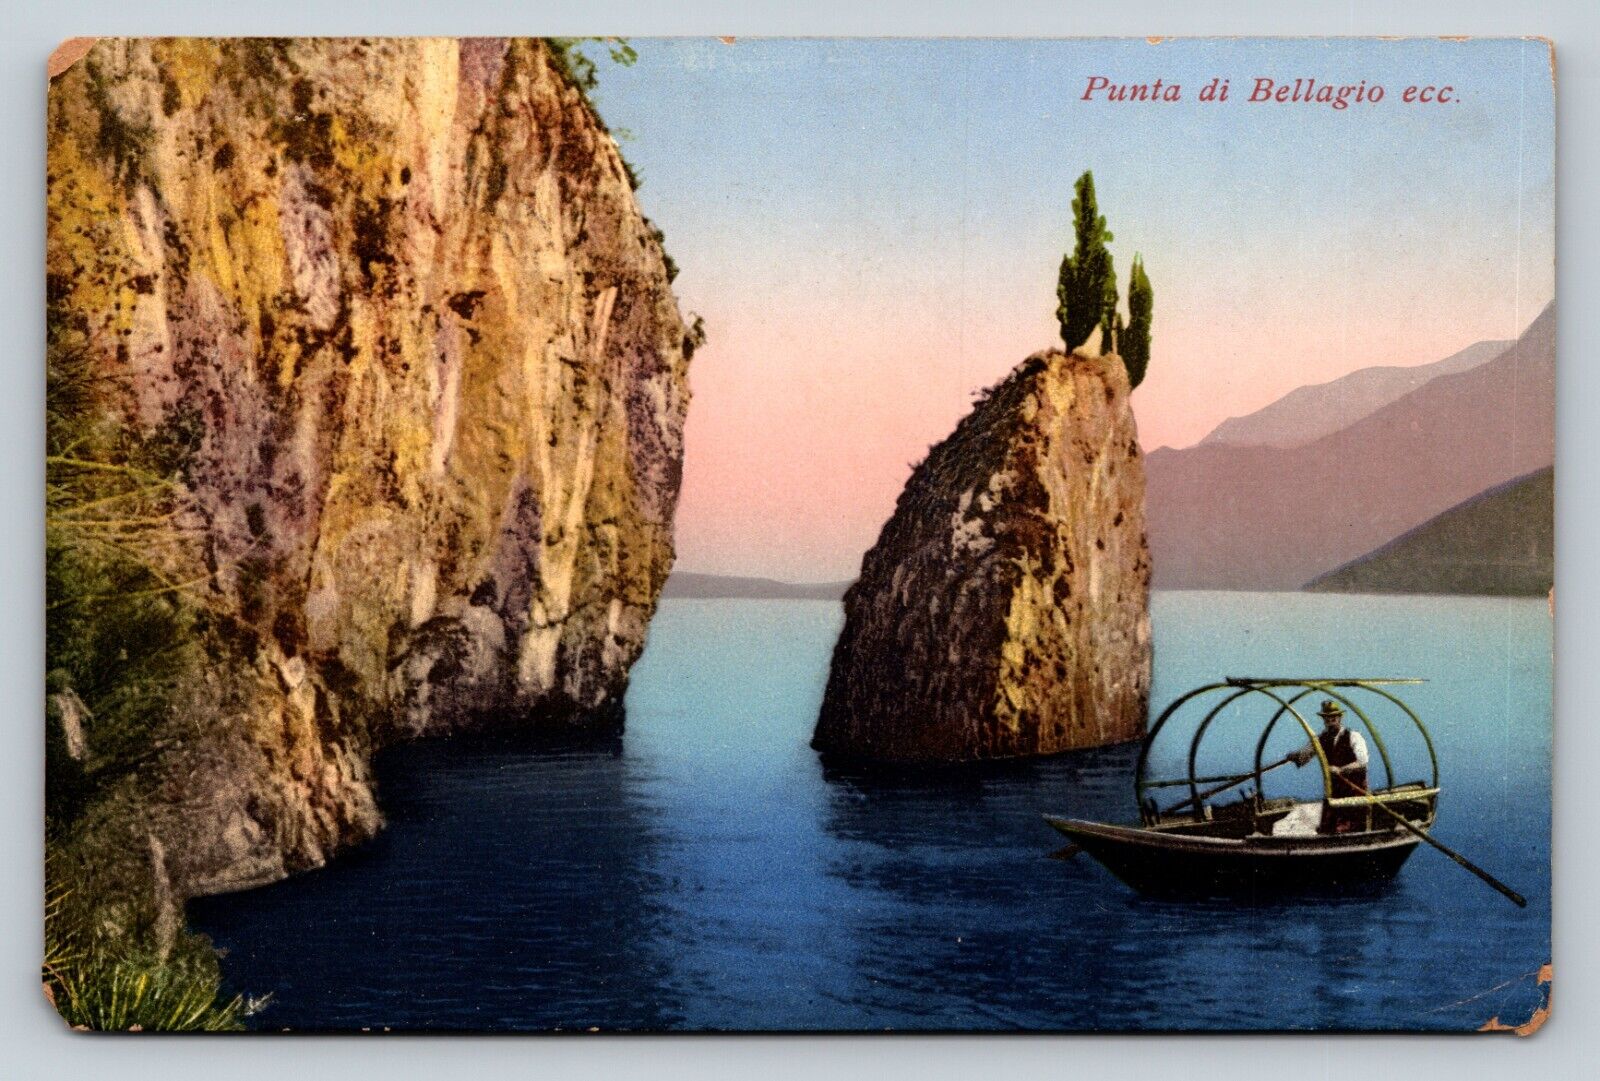 Peninsula of Bellagio Lombardy, Italy Unposted VINTAGE Postcard